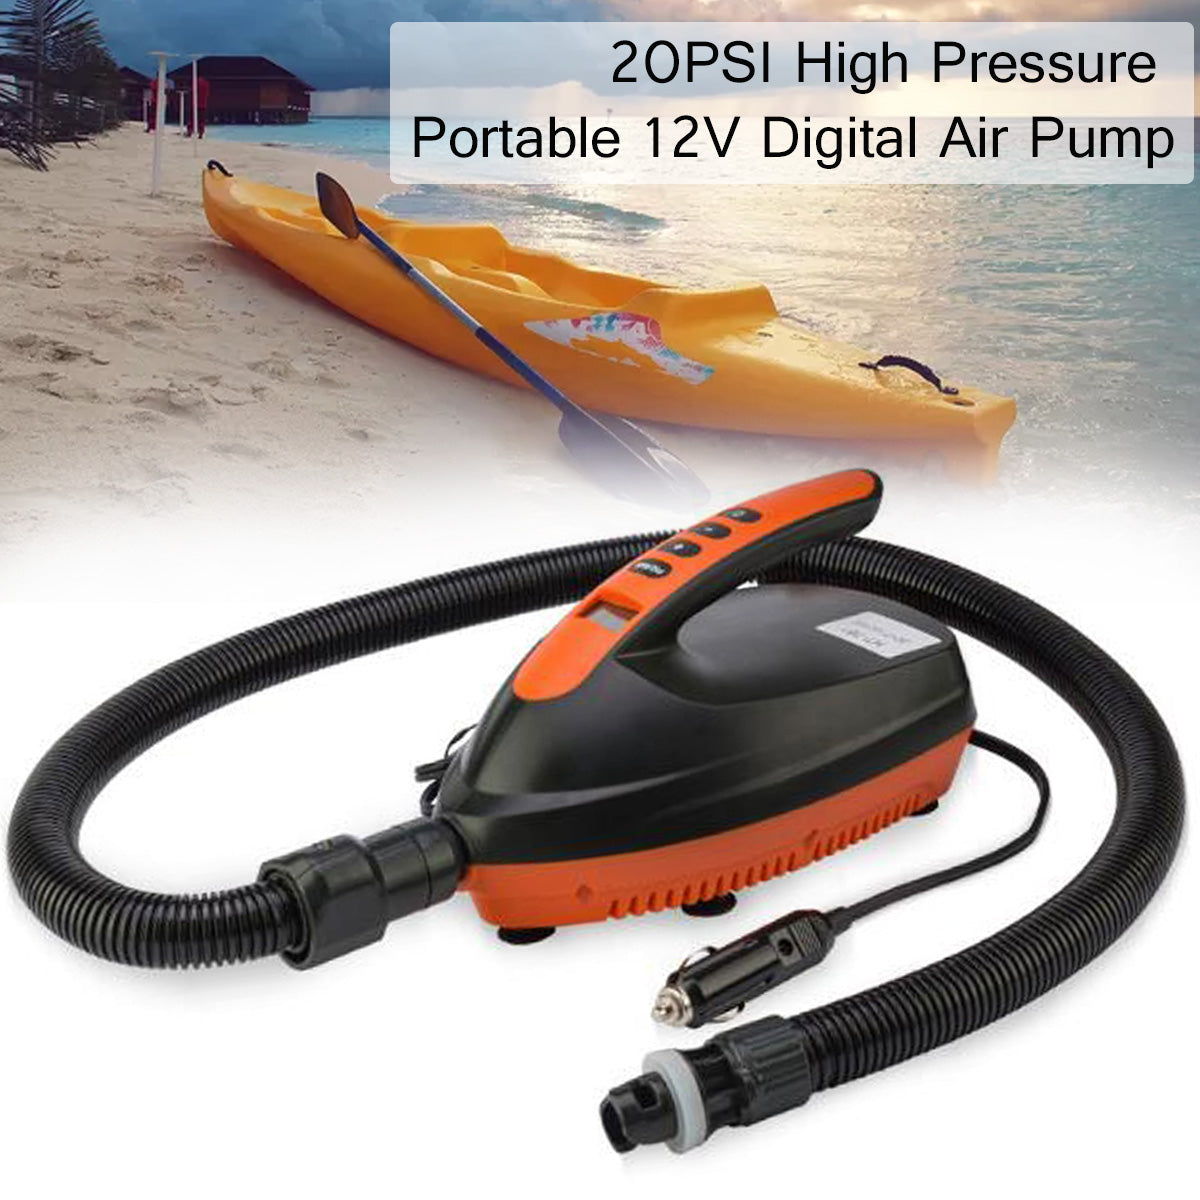 12V LED Display 16SPI Outdoor Sports Vehicle Inflatable Pump Paddle Board Dinghy Kayaking Air Pump with 6pcs Air Tap